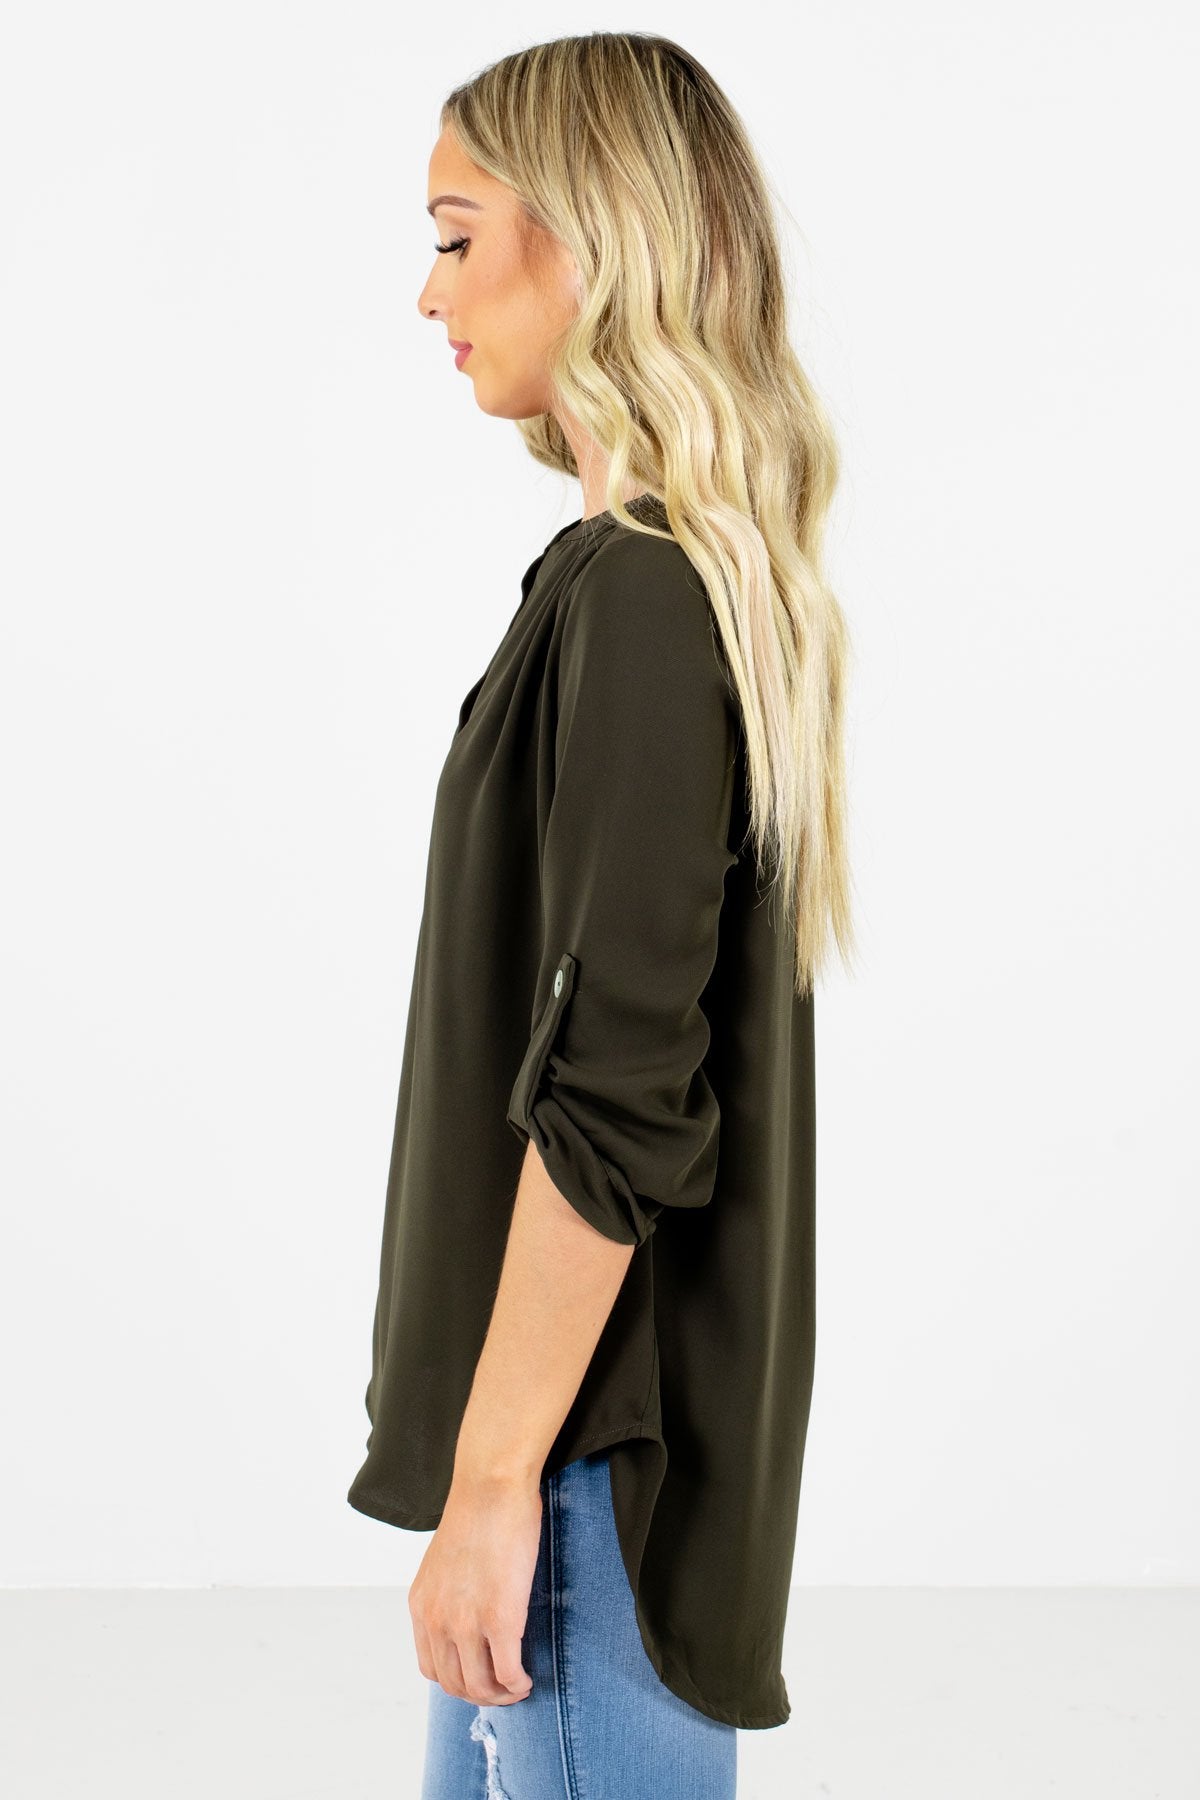 Olive Green ¾ Length Sleeve Boutique Blouses for Women